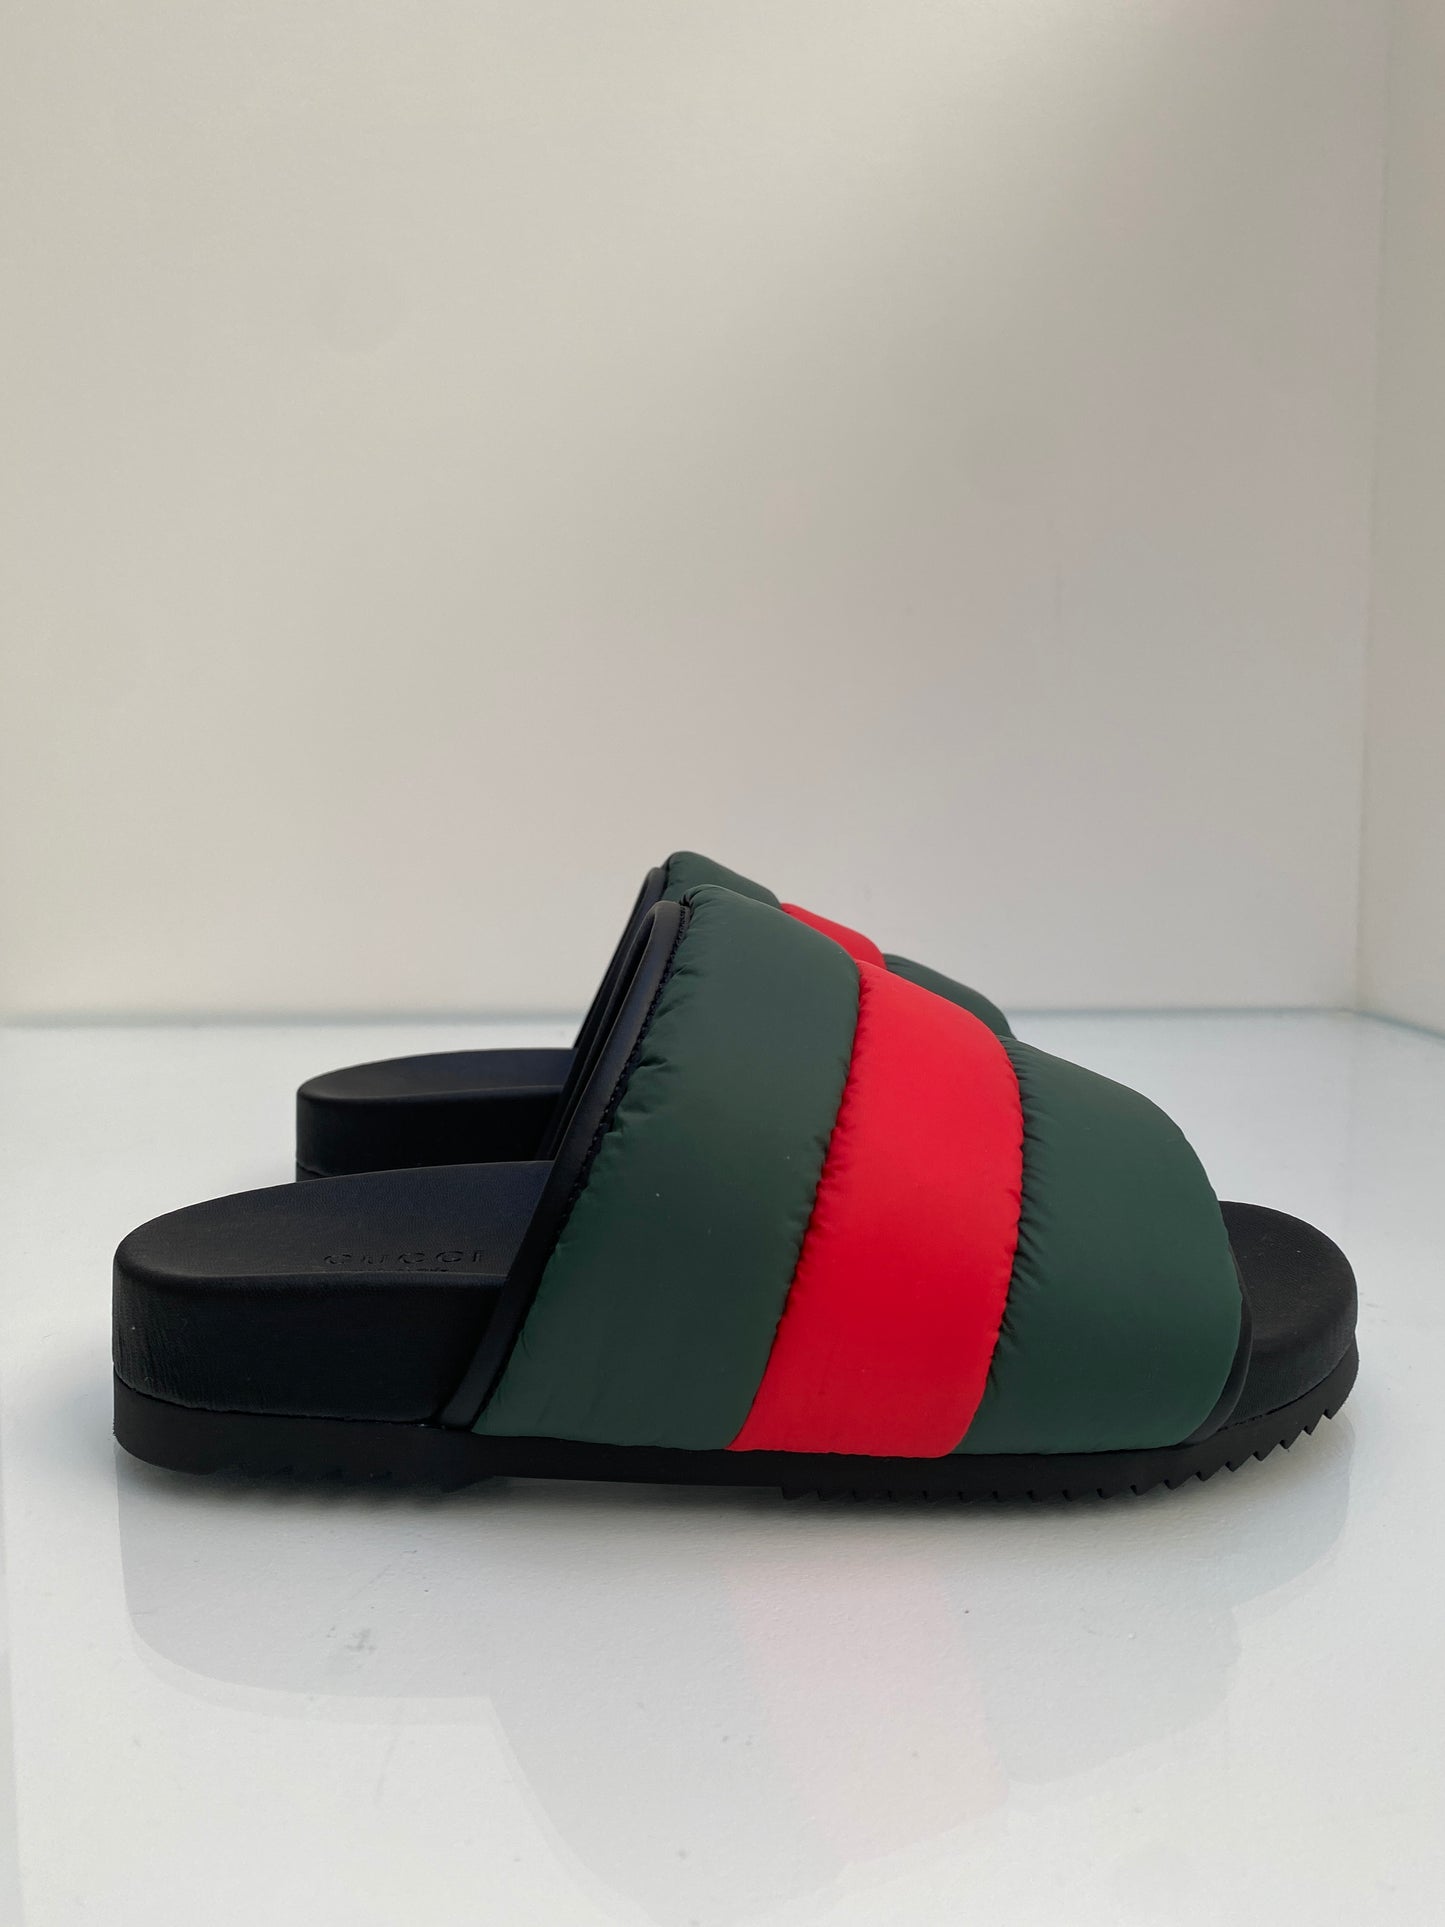 Gucci Red and Green Puffer Slides, 7